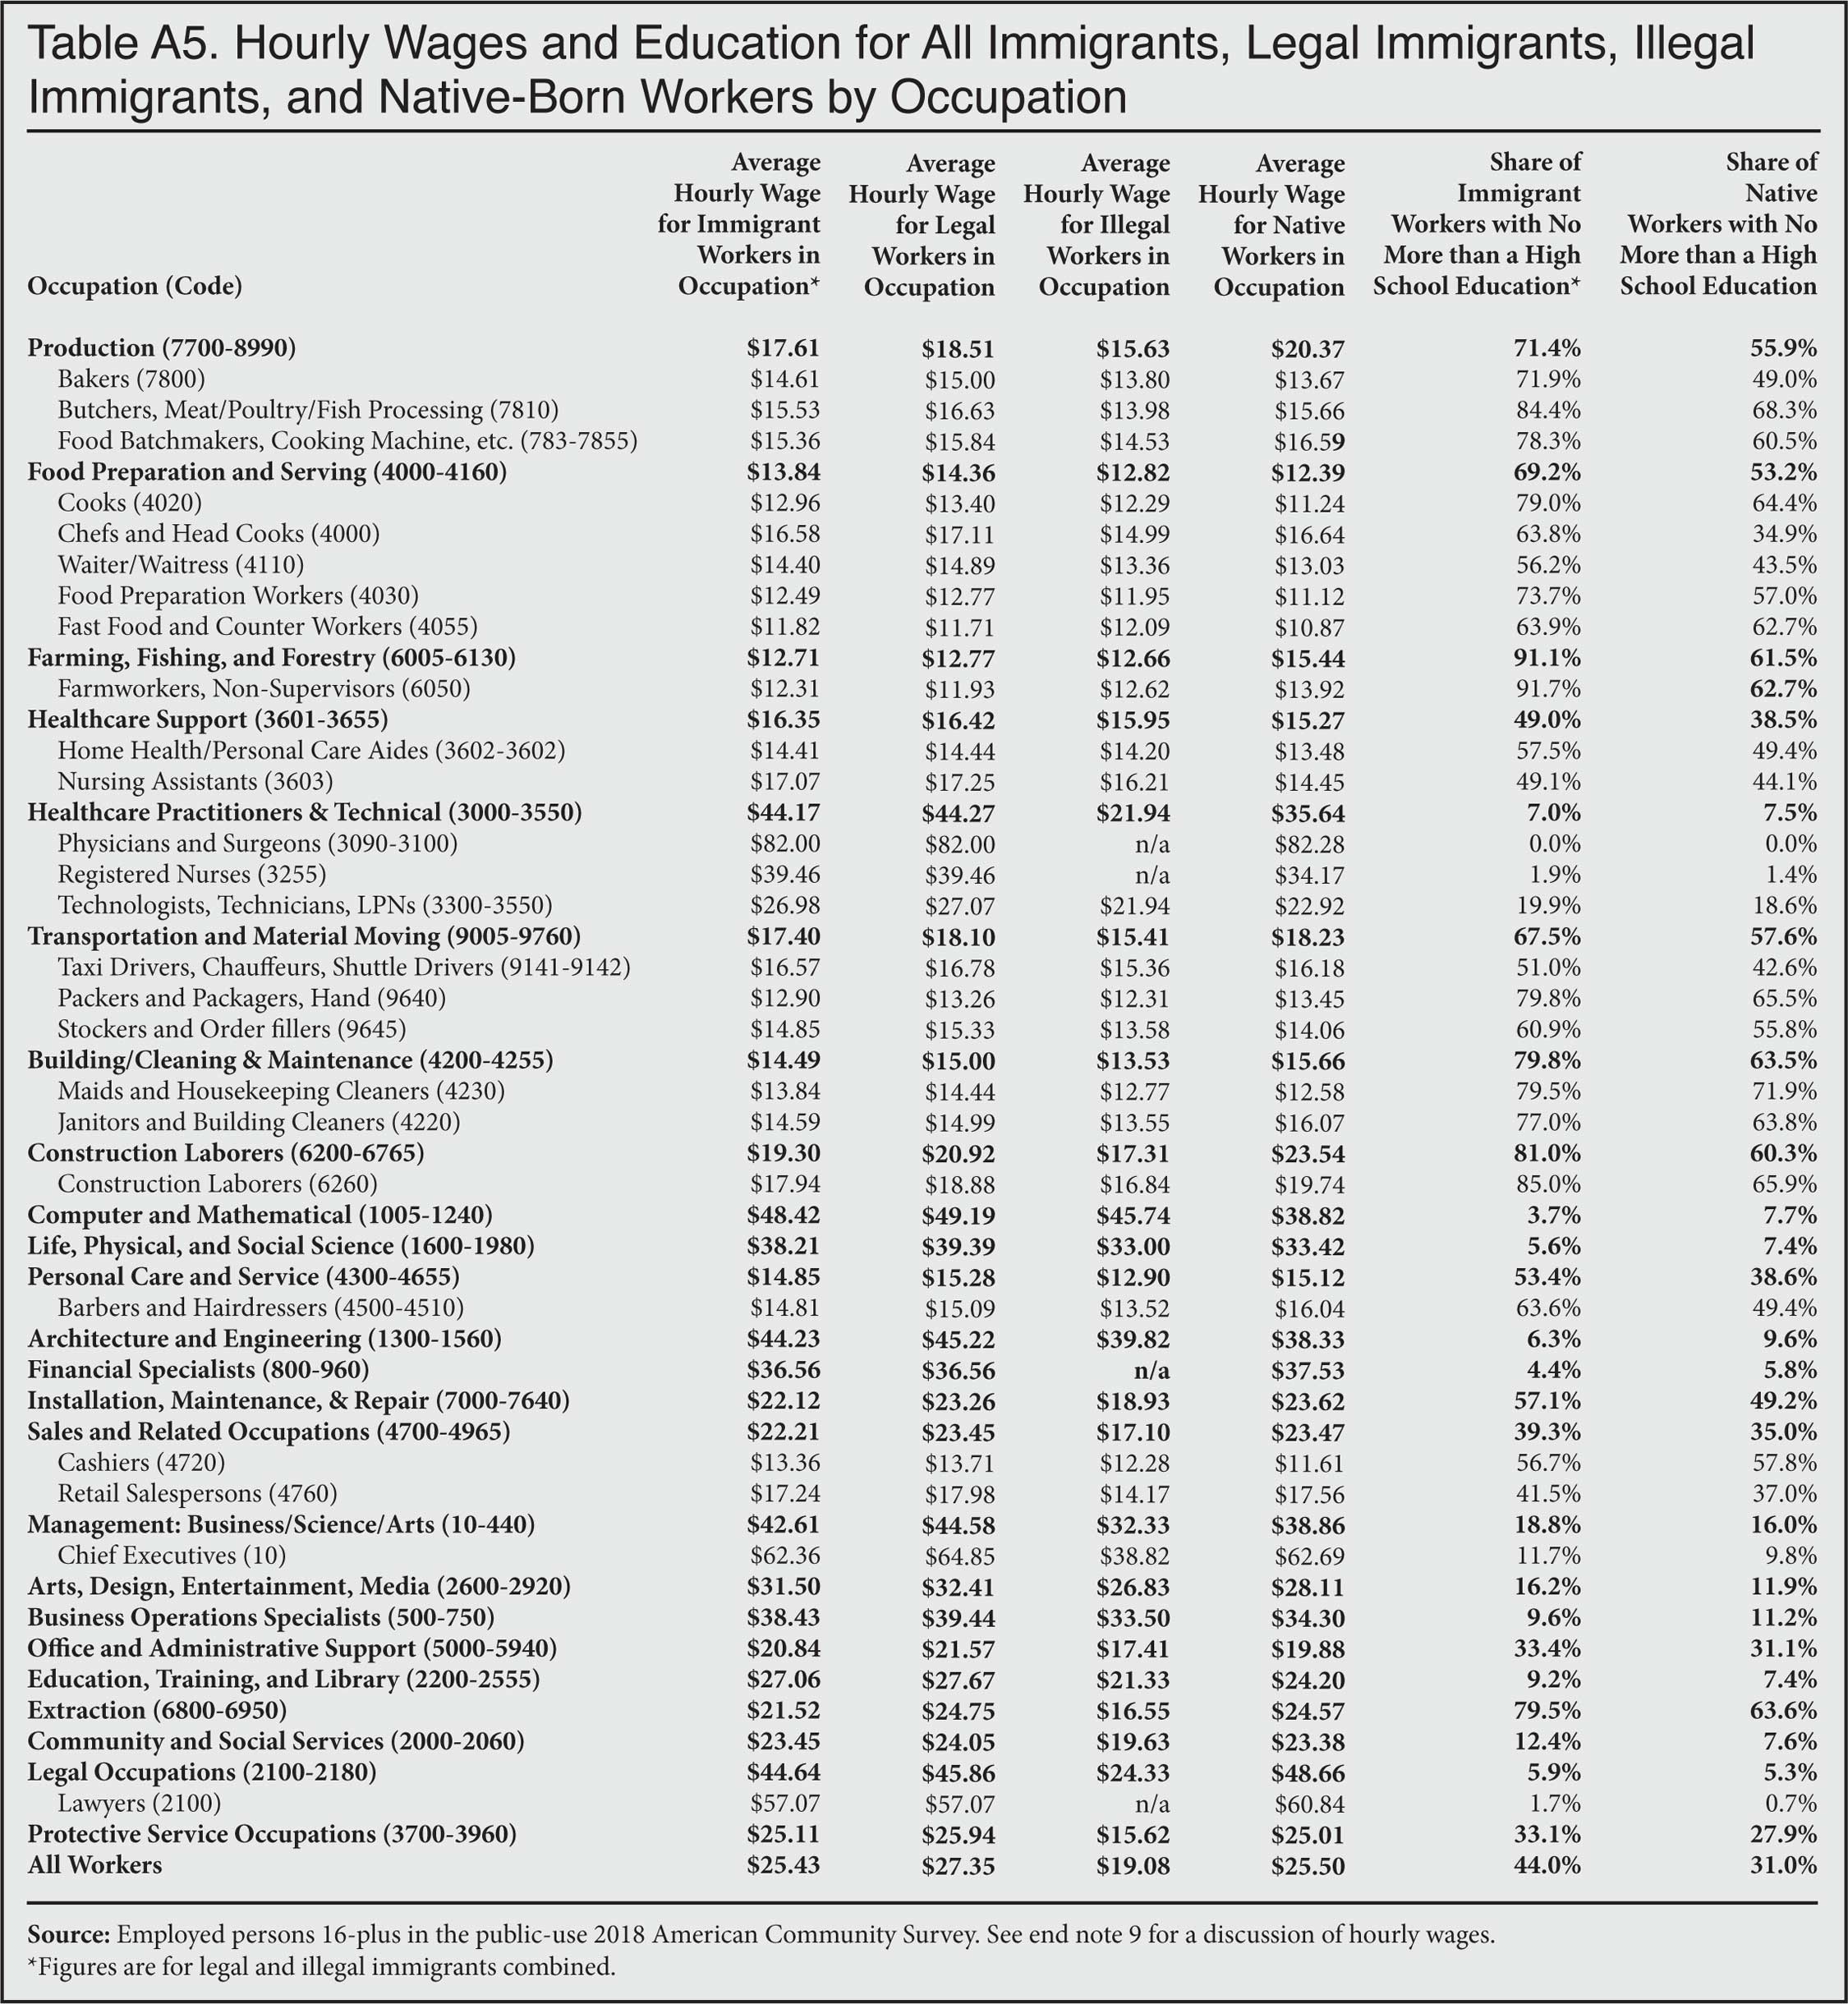 Table: Hourly wages and education for all immigrants, legal immigrants, illegal immigrants, and native born workers by occupation